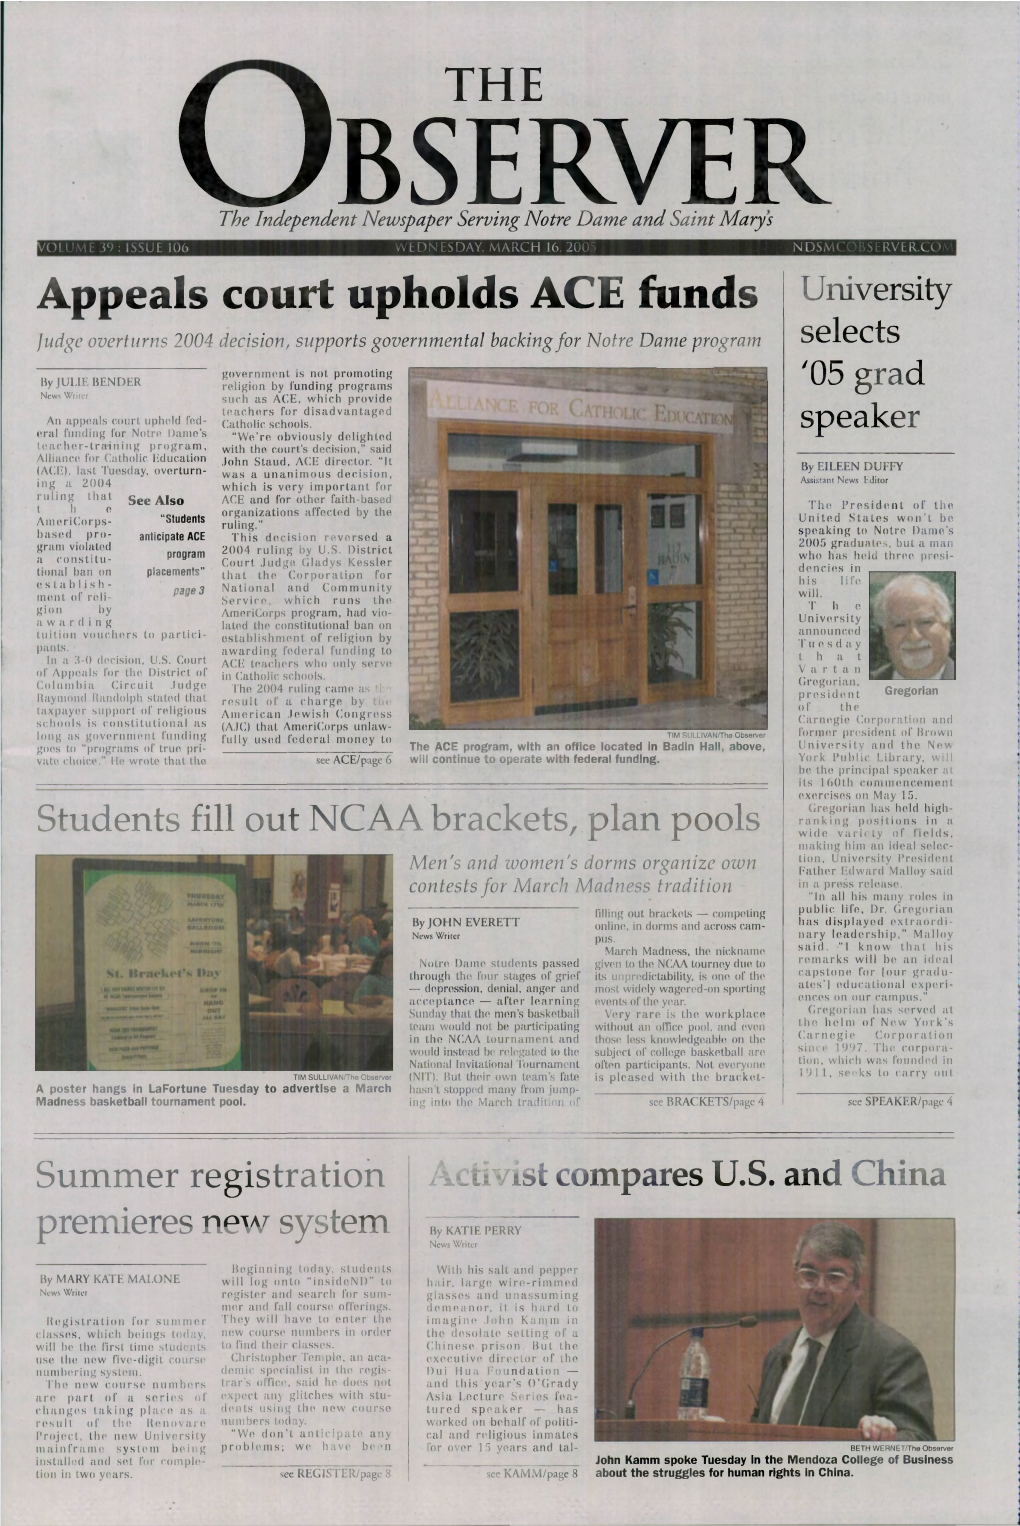 OBSERVER.COM Appeals Court Upholds ACE Funds University Judge Overturns 2004 Decision, Supports Governmental Backing for Notre Dame Program Selects